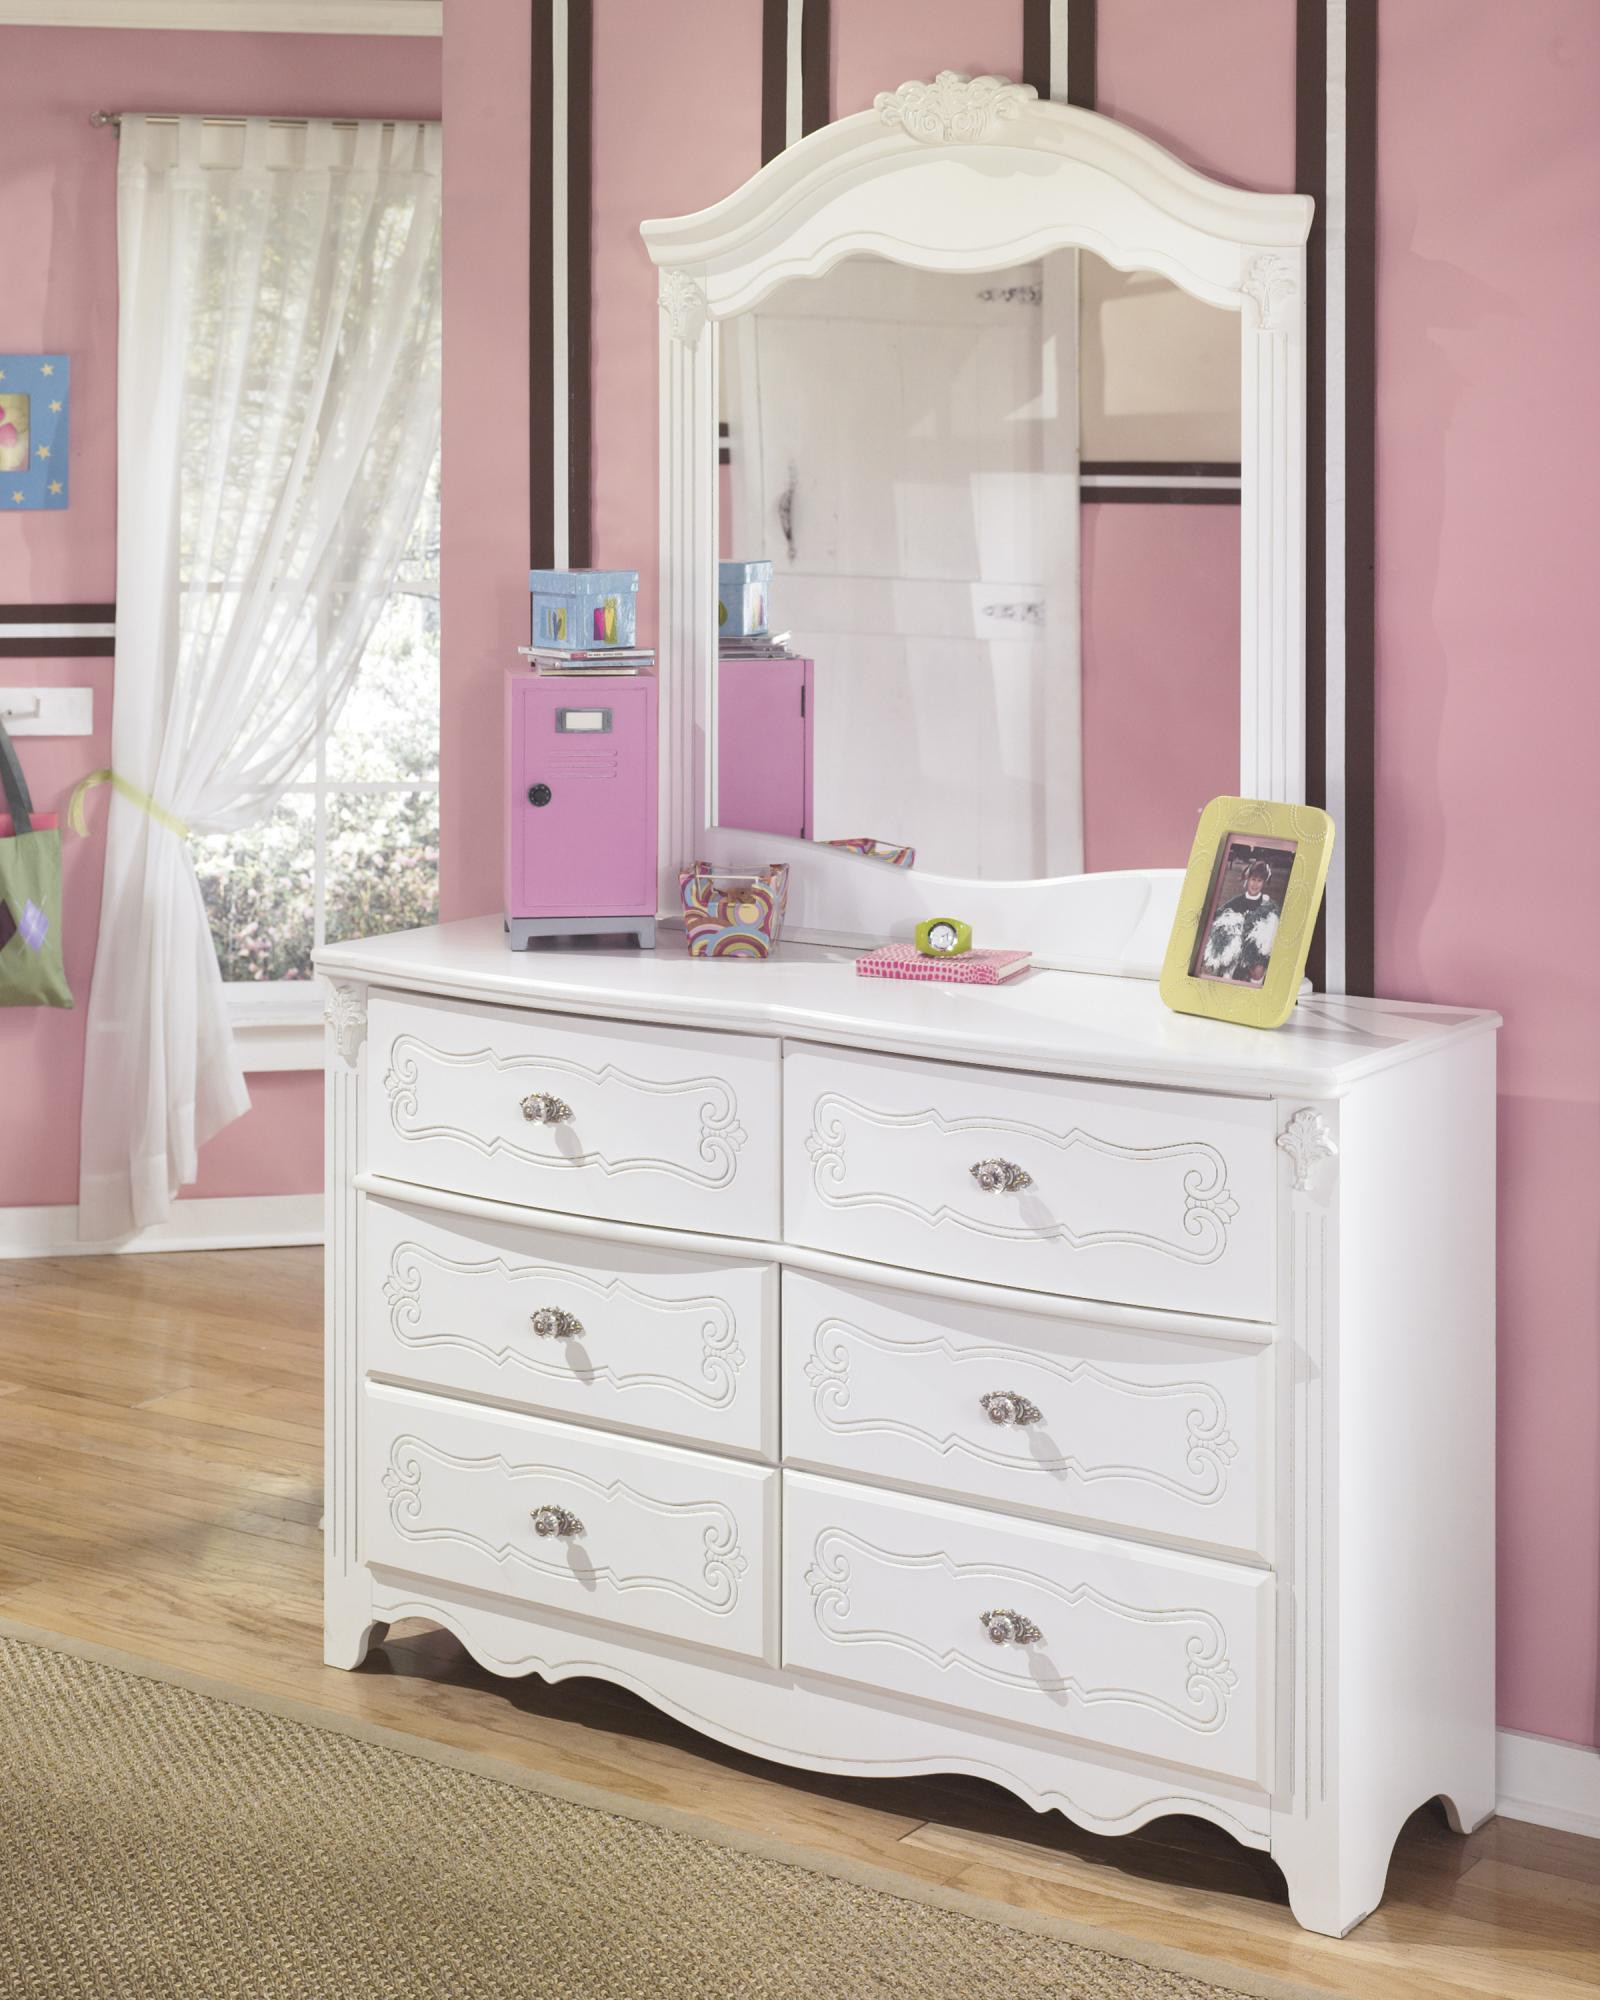 Girls White Bedroom Furniture Set
 Ashley Exquisite B188Y Twin Size Poster Bedroom Set 6pcs